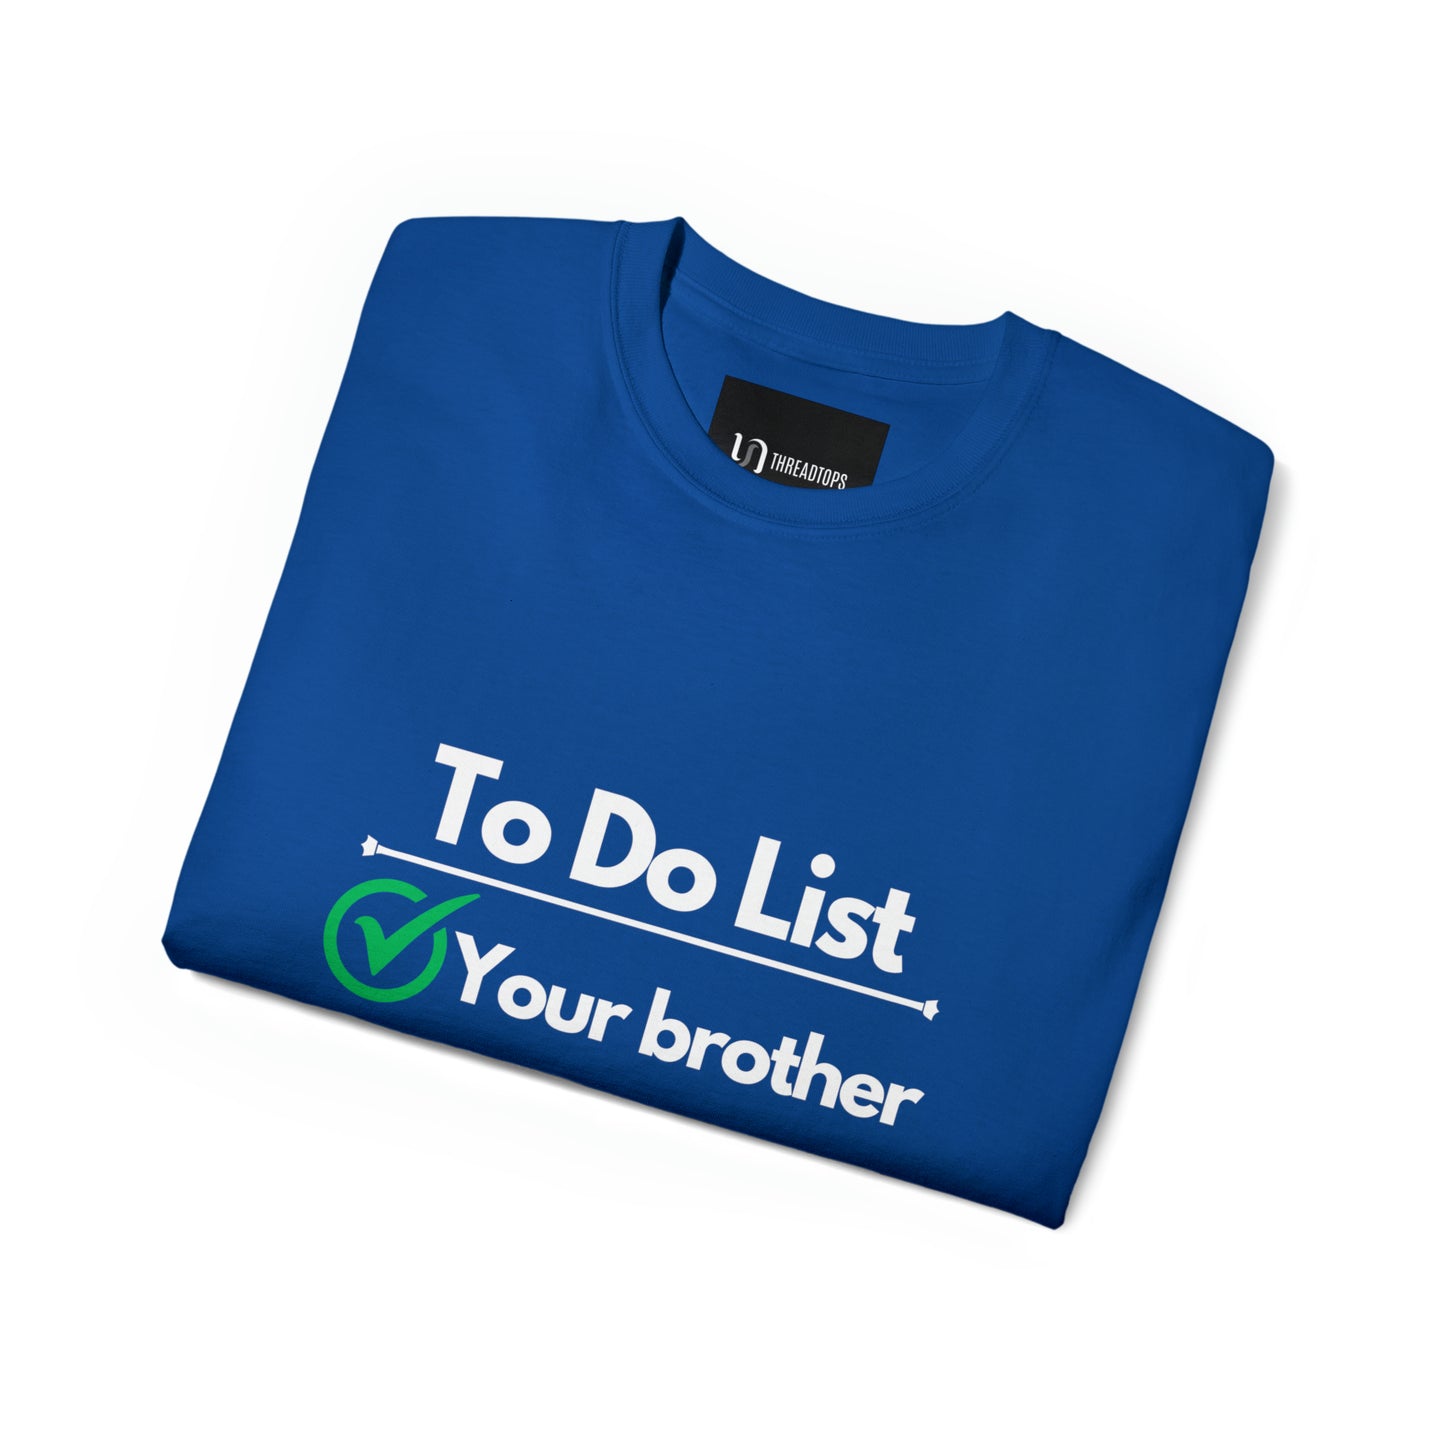 To do list your brother | Tee